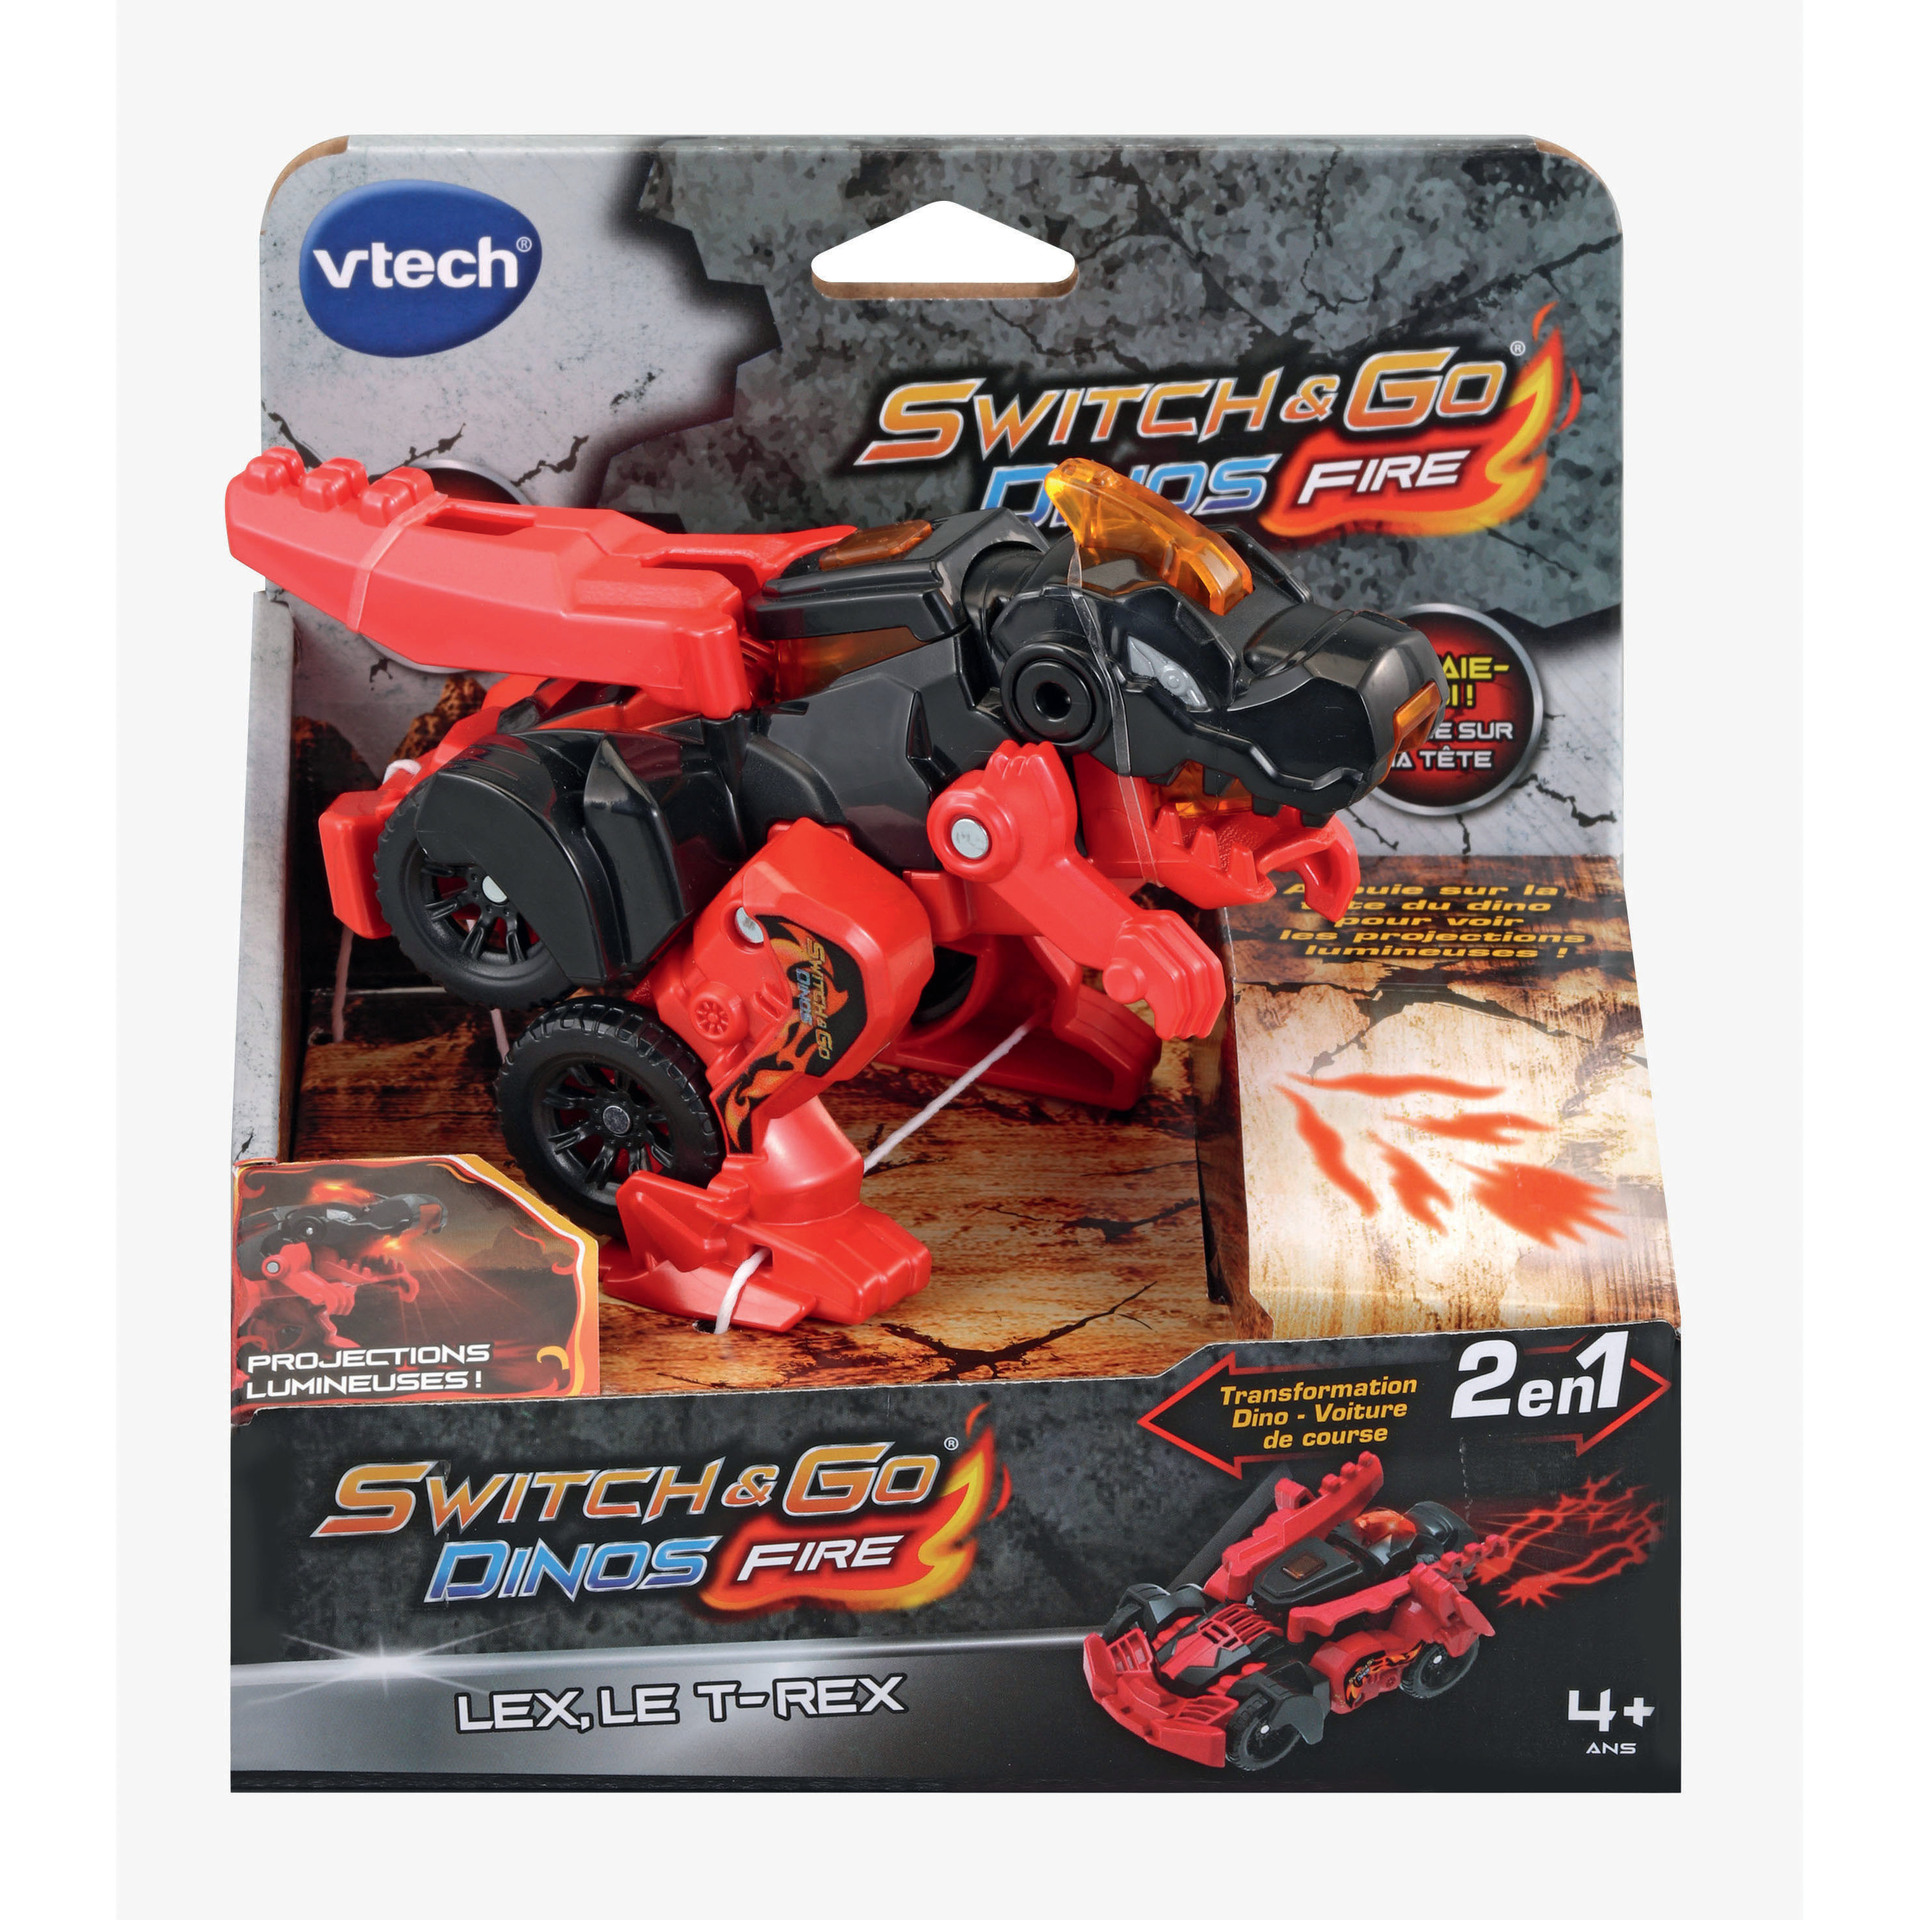 Petits switch et go dinos 1'click, vehicules-garages